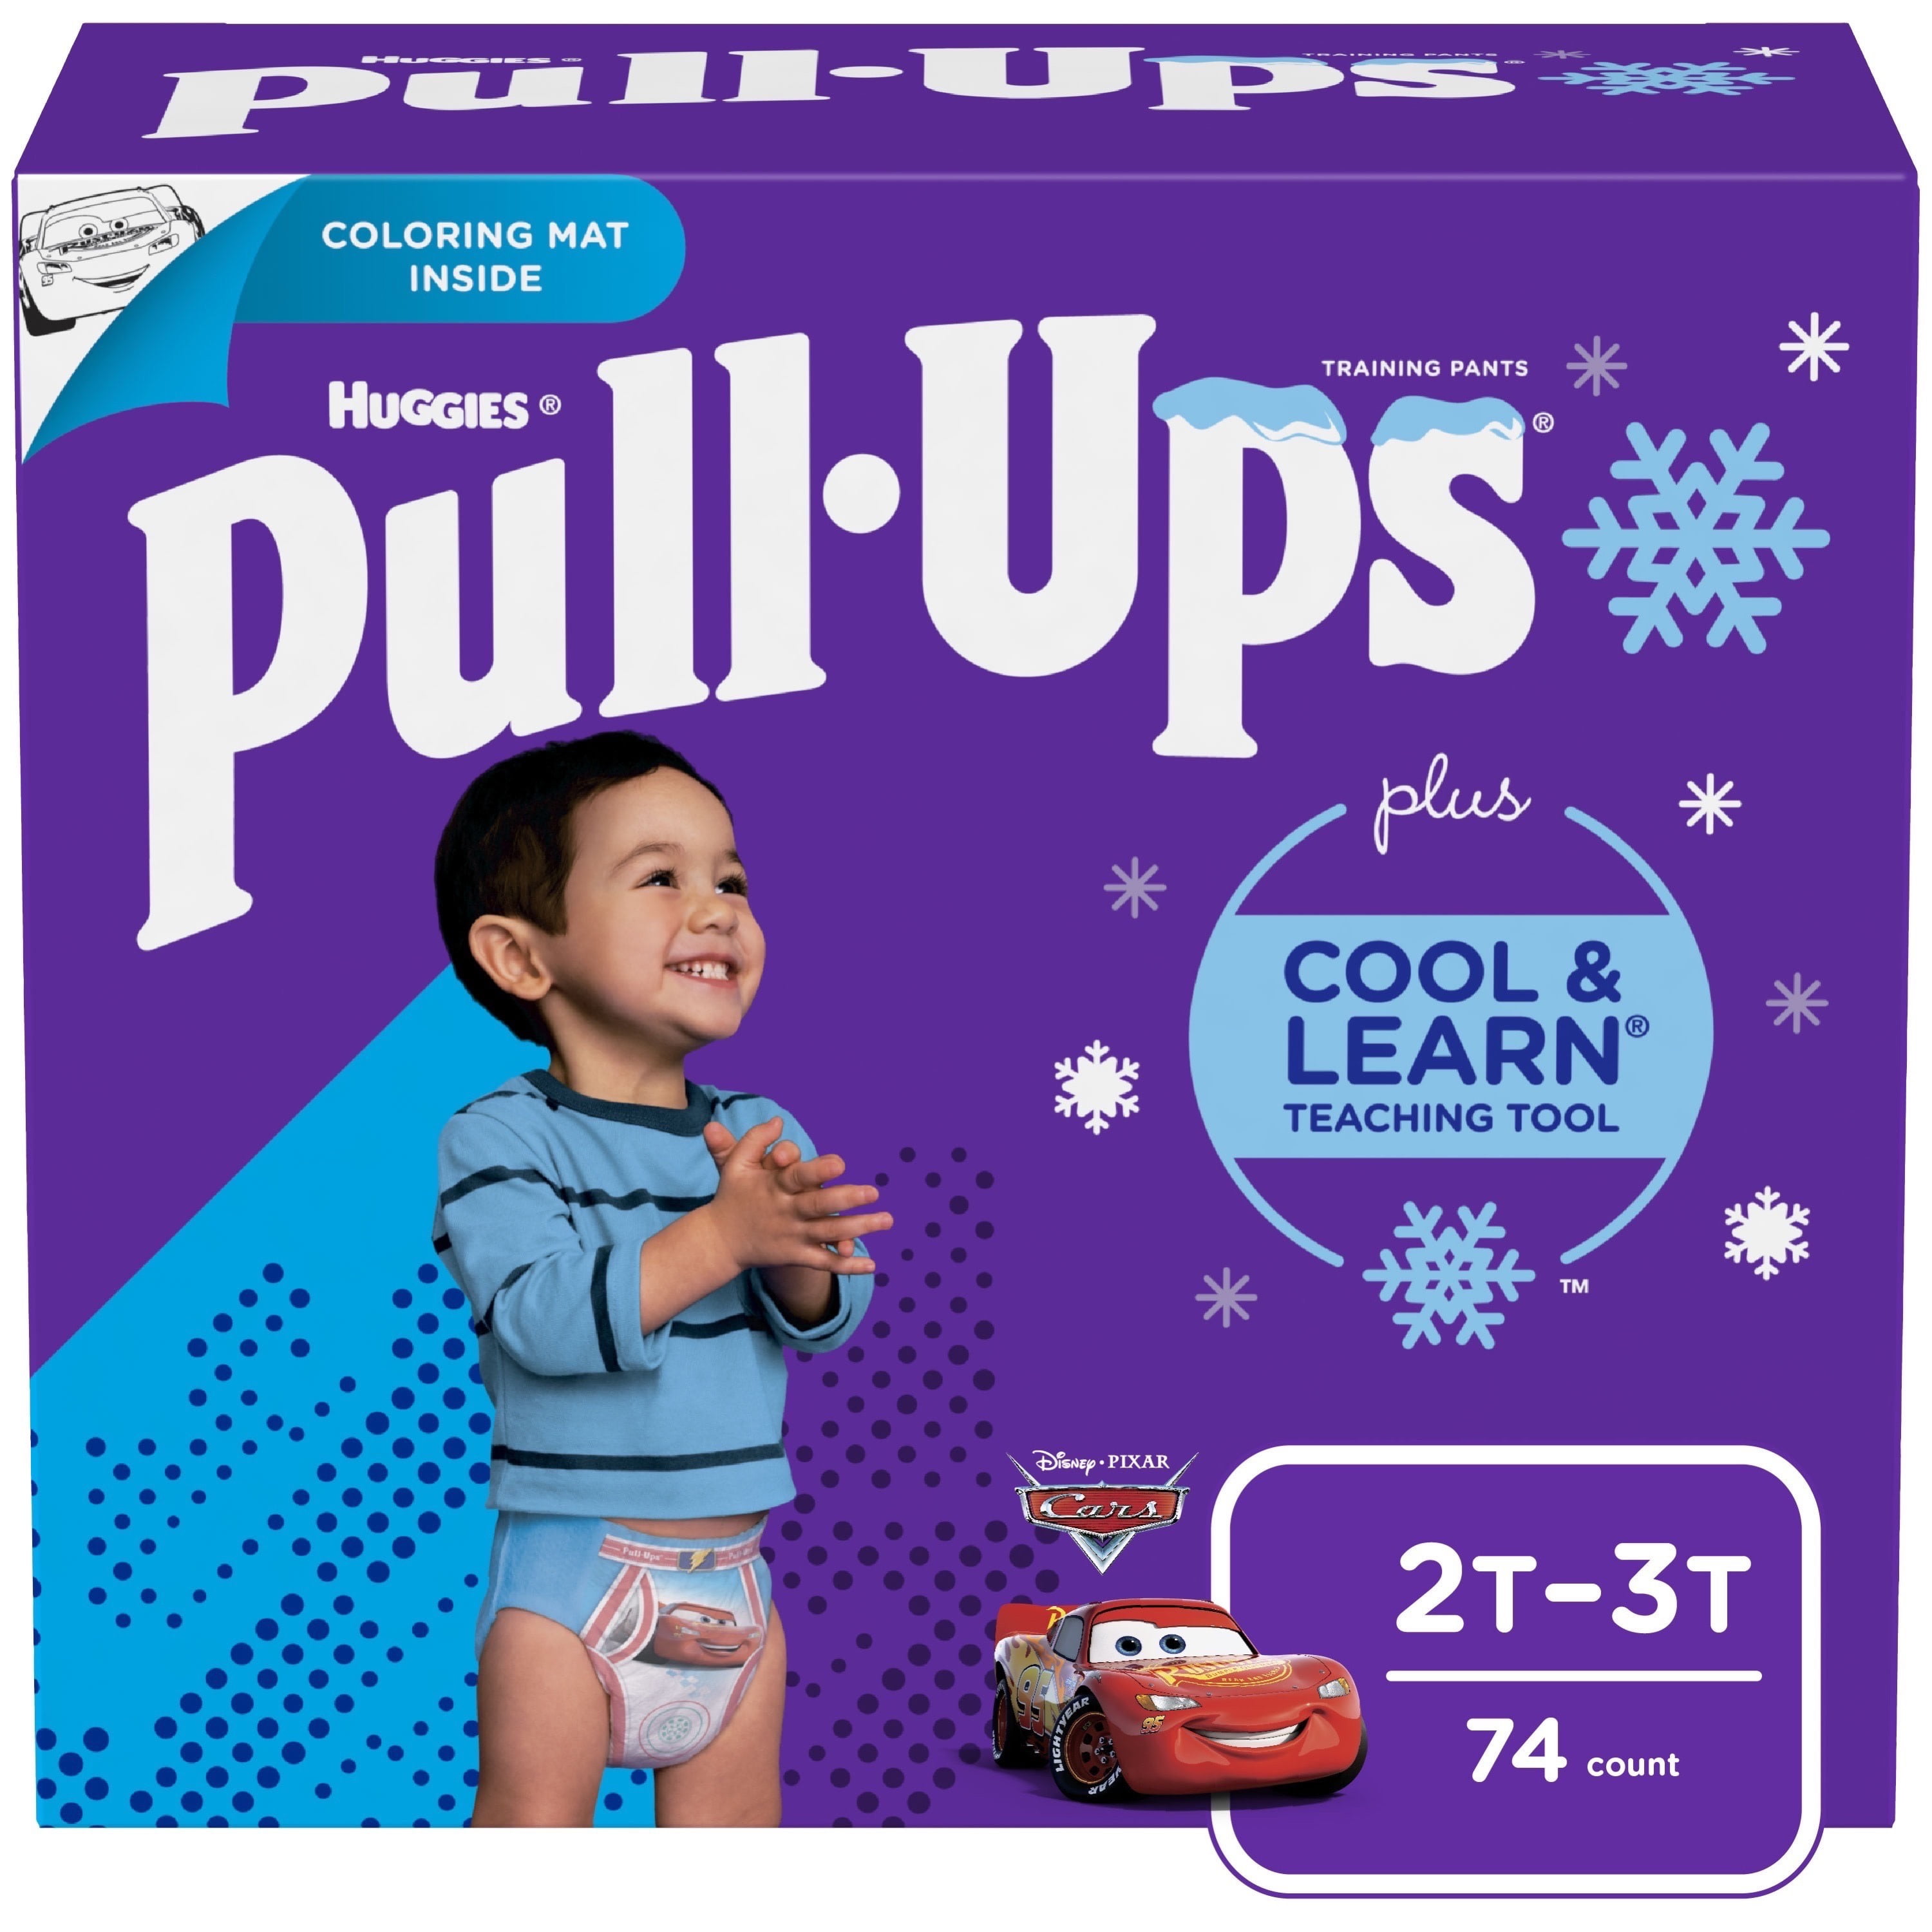 Pampers Easy Ups Training Underwear for Boys (Size 2T-3T, 74 Count